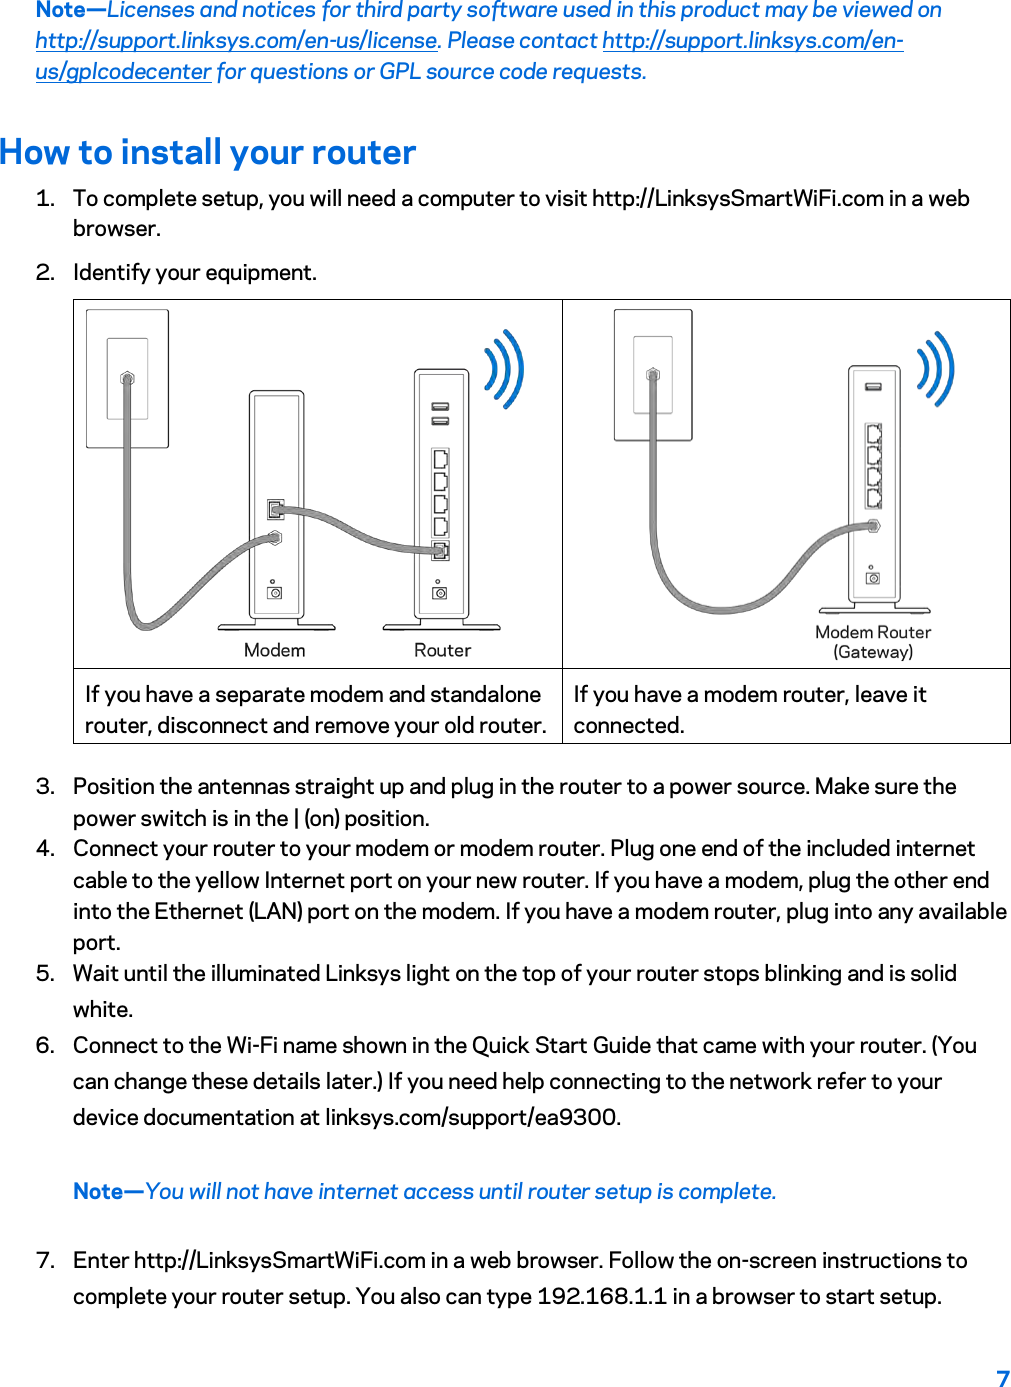 7  Note—Licenses and notices for third party software used in this product may be viewed on http://support.linksys.com/en-us/license. Please contact http://support.linksys.com/en-us/gplcodecenter for questions or GPL source code requests. How to install your router 1. To complete setup, you will need a computer to visit http://LinksysSmartWiFi.com in a web browser. 2. Identify your equipment.   If you have a separate modem and standalone router, disconnect and remove your old router. If you have a modem router, leave it connected. 3. Position the antennas straight up and plug in the router to a power source. Make sure the power switch is in the | (on) position. 4. Connect your router to your modem or modem router. Plug one end of the included internet cable to the yellow Internet port on your new router. If you have a modem, plug the other end into the Ethernet (LAN) port on the modem. If you have a modem router, plug into any available port. 5. Wait until the illuminated Linksys light on the top of your router stops blinking and is solid white.  6. Connect to the Wi-Fi name shown in the Quick Start Guide that came with your router. (You can change these details later.) If you need help connecting to the network refer to your device documentation at linksys.com/support/ea9300. Note—You will not have internet access until router setup is complete. 7. Enter http://LinksysSmartWiFi.com in a web browser. Follow the on-screen instructions to complete your router setup. You also can type 192.168.1.1 in a browser to start setup. 